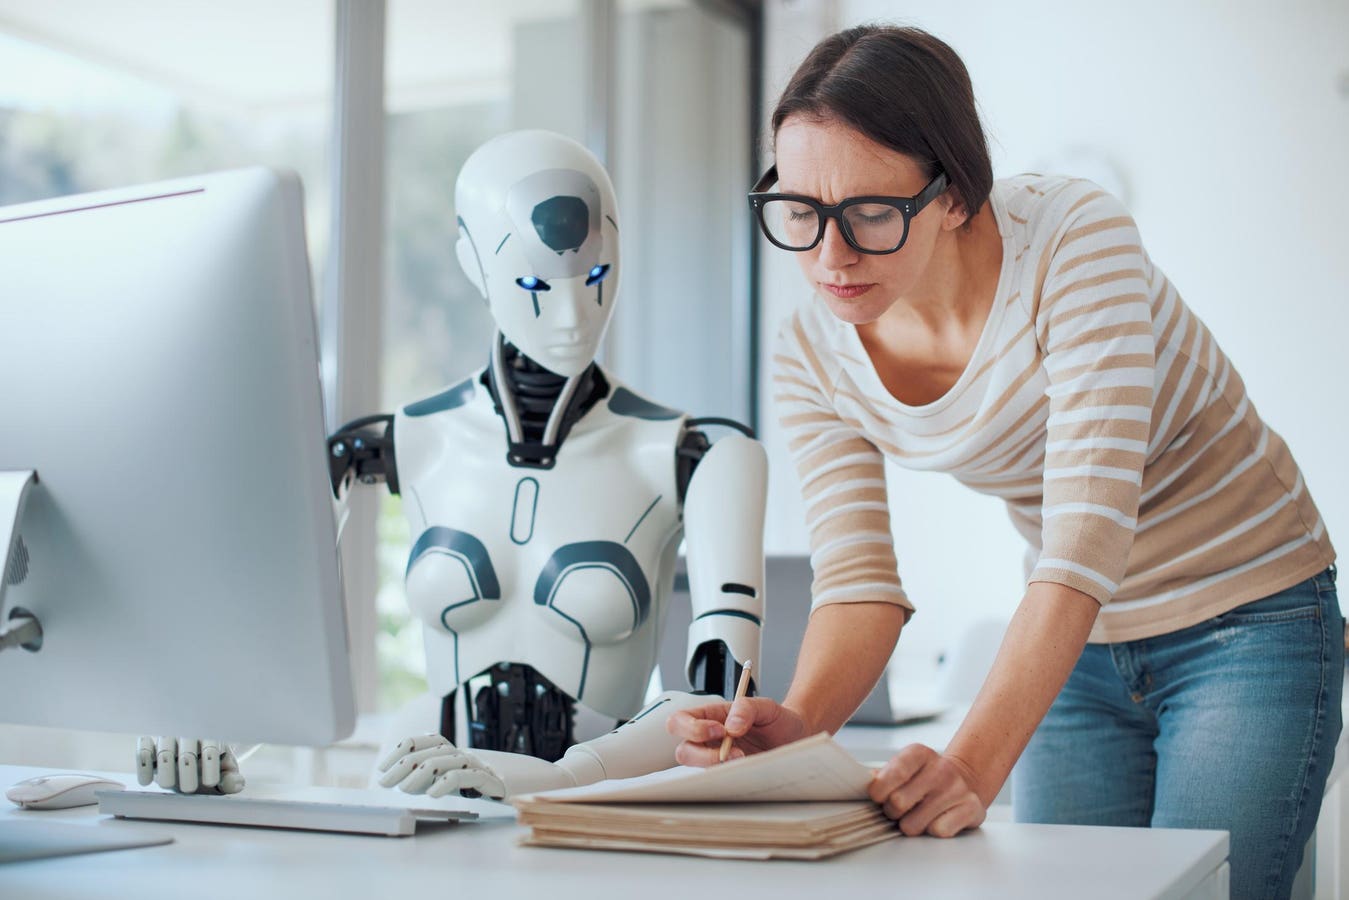 4 Mistakes That Leaders Should Avoid With AI